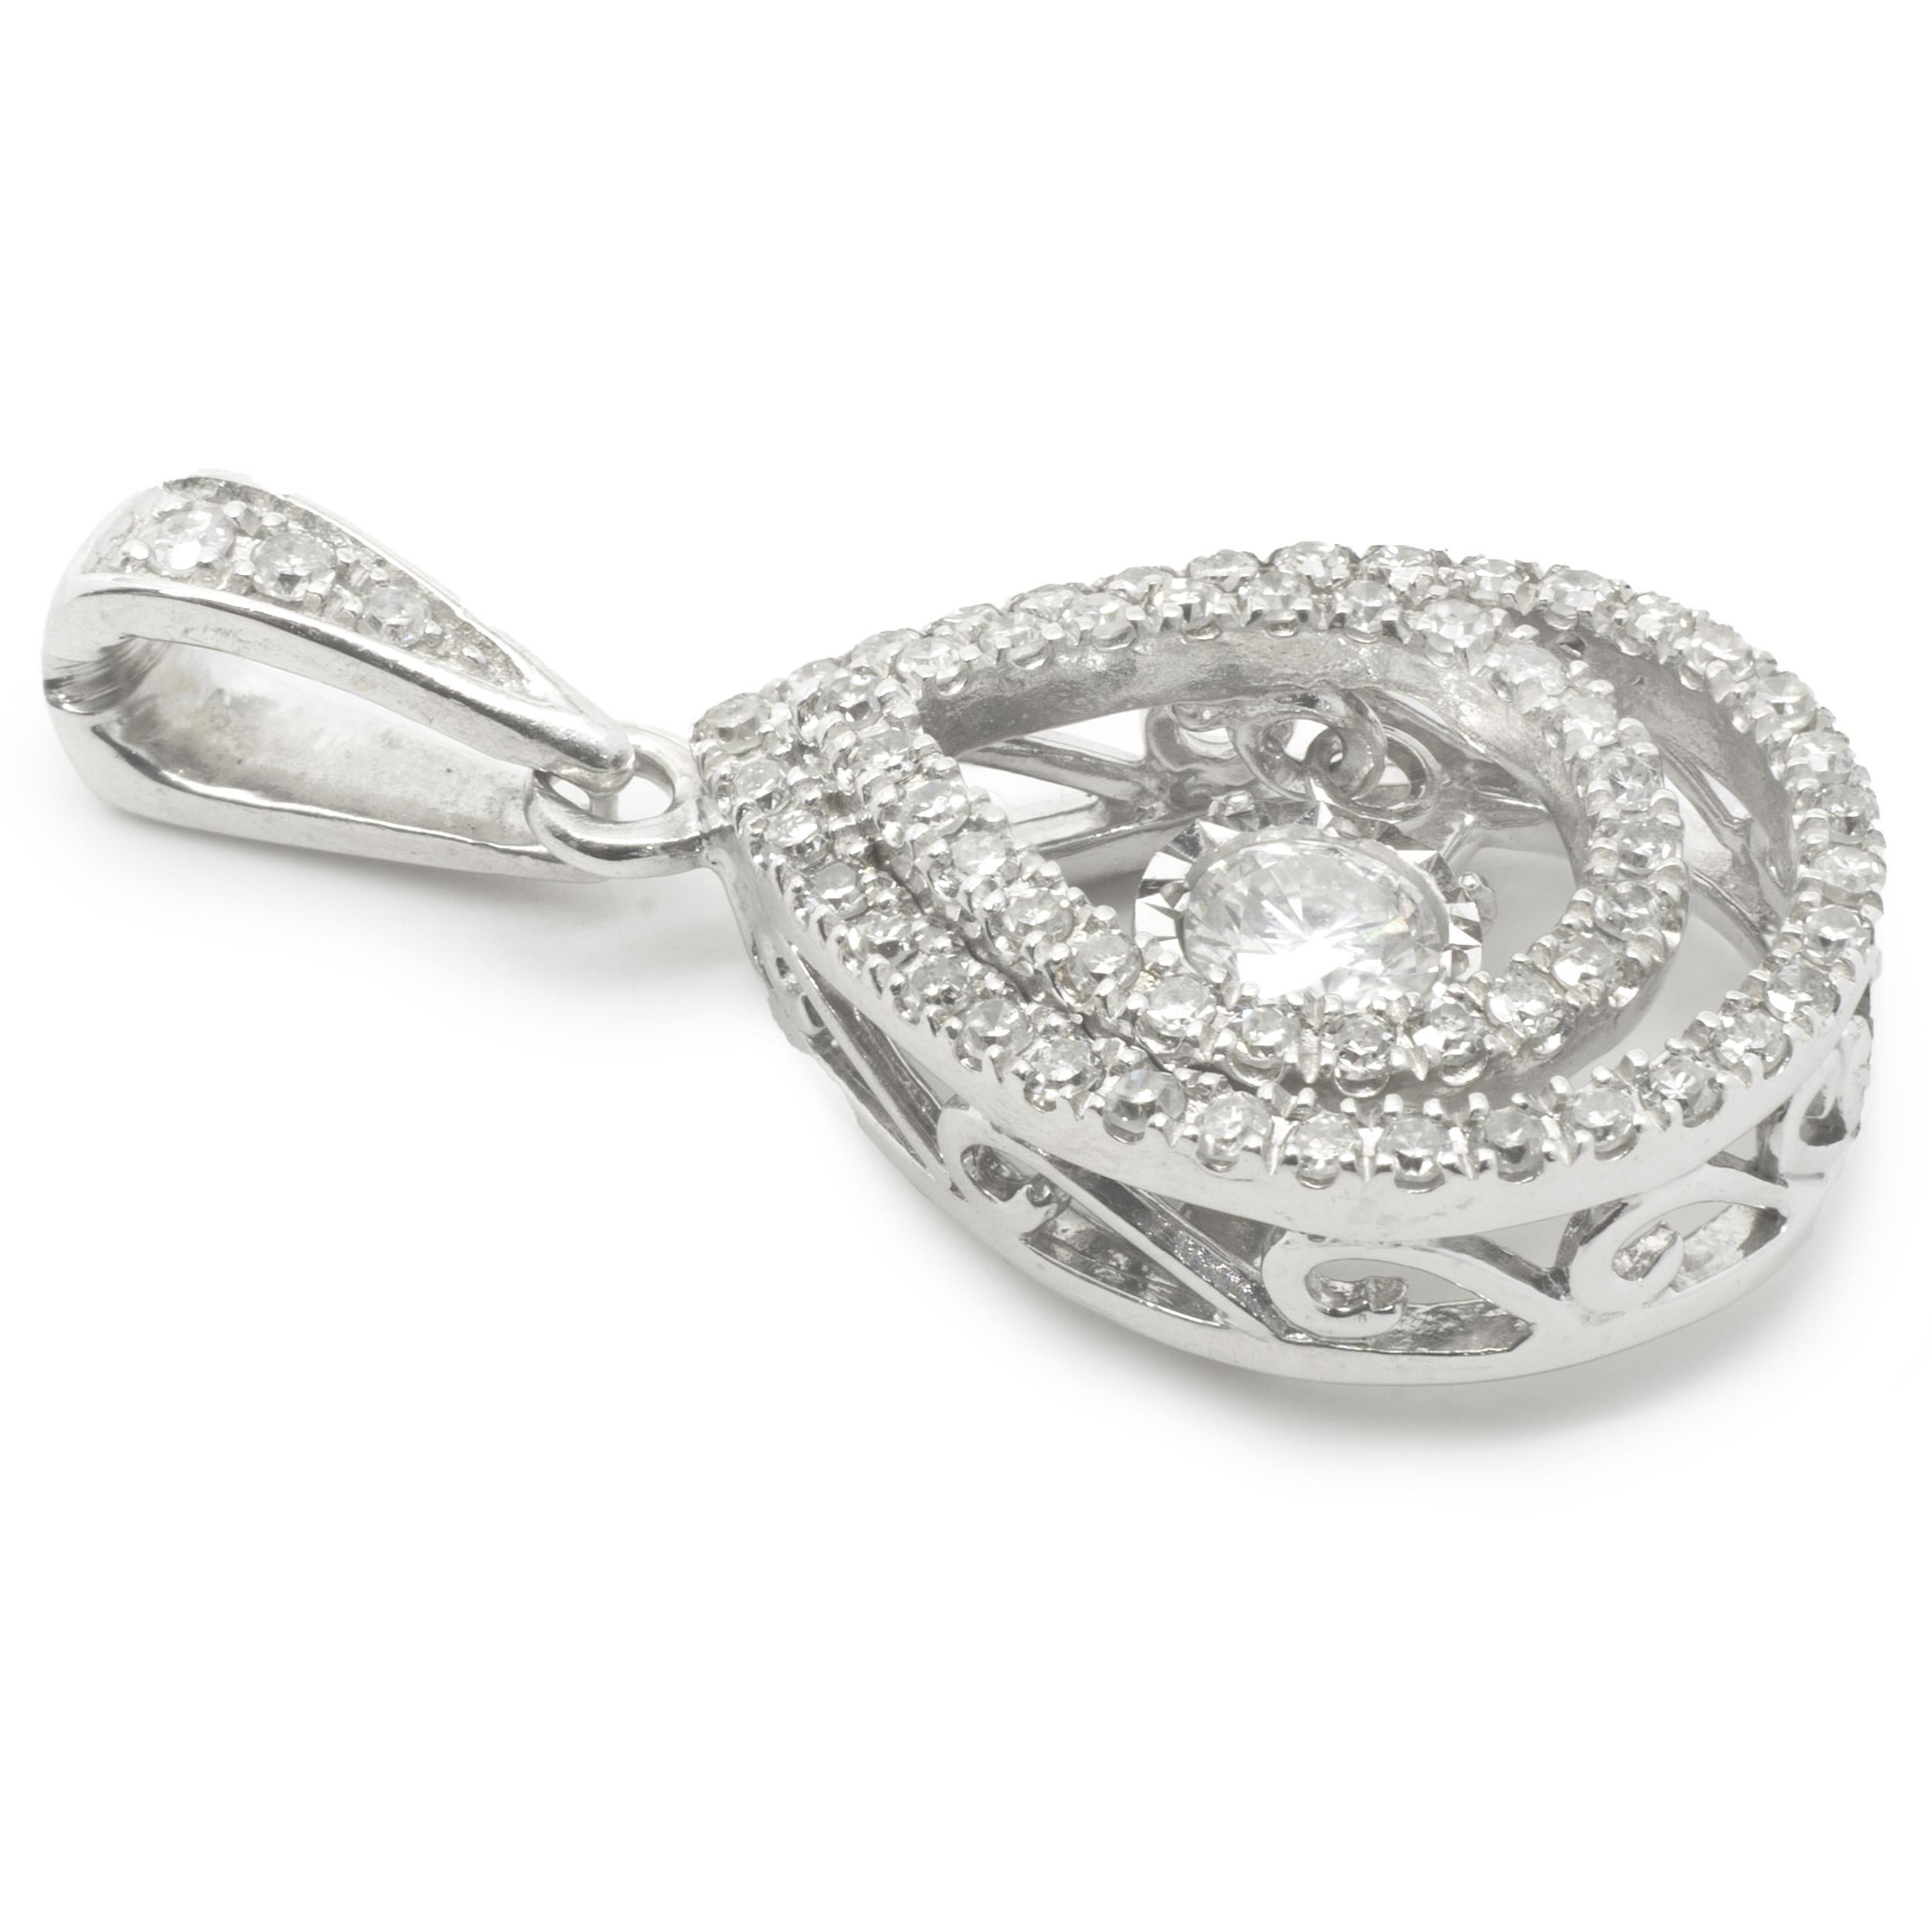 10 Karat White Gold Floating Diamond Pendant In Excellent Condition For Sale In Scottsdale, AZ